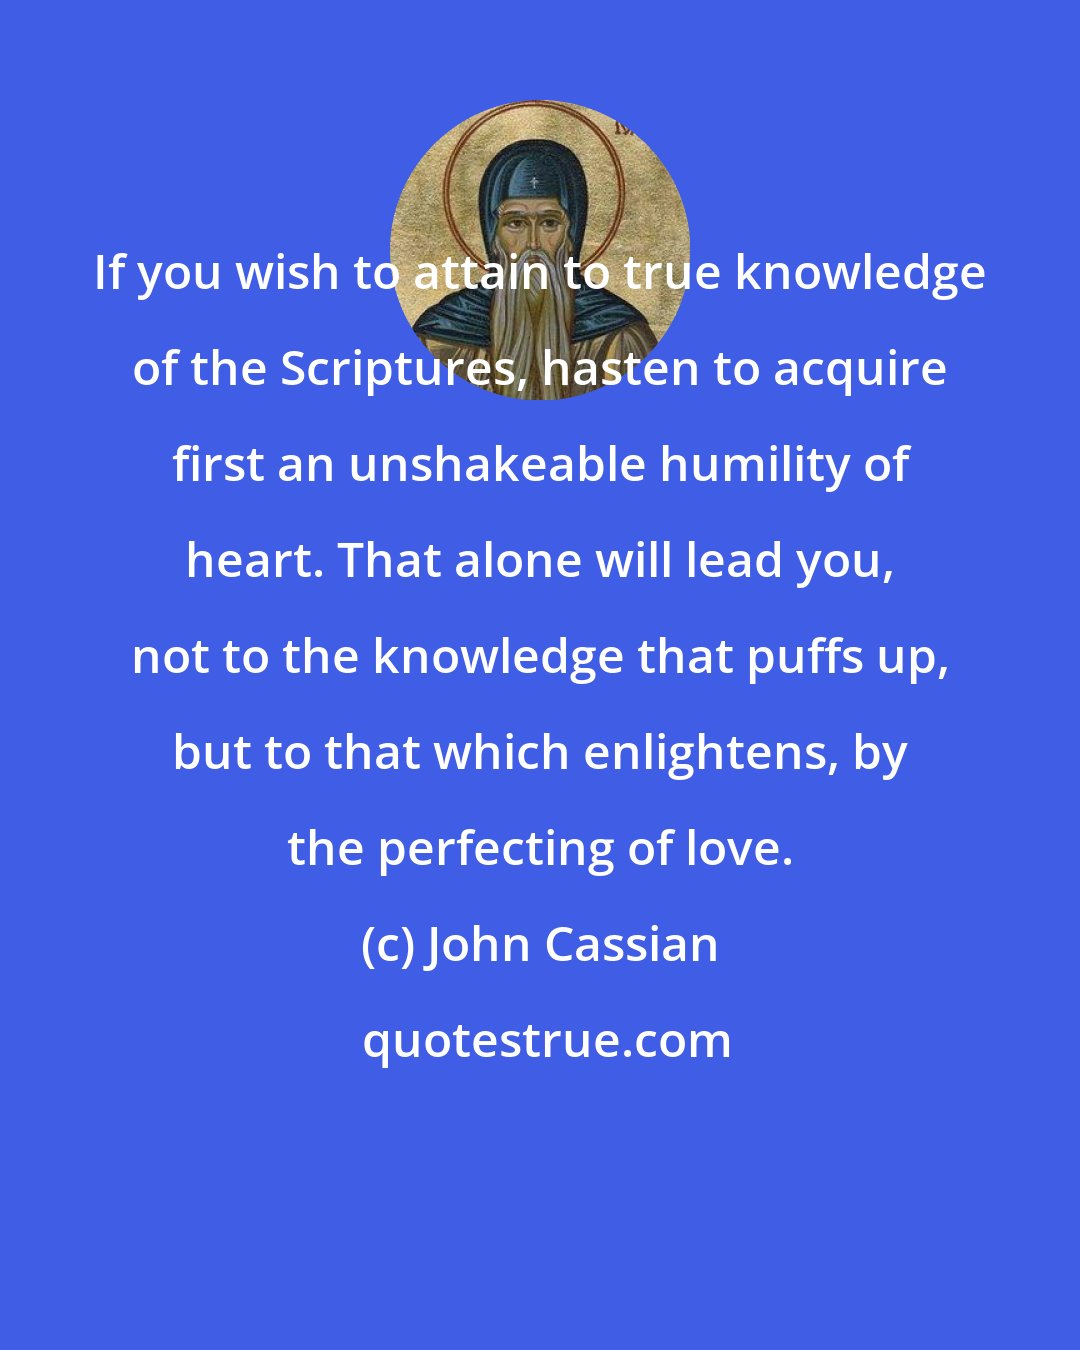 John Cassian: If you wish to attain to true knowledge of the Scriptures, hasten to acquire first an unshakeable humility of heart. That alone will lead you, not to the knowledge that puffs up, but to that which enlightens, by the perfecting of love.